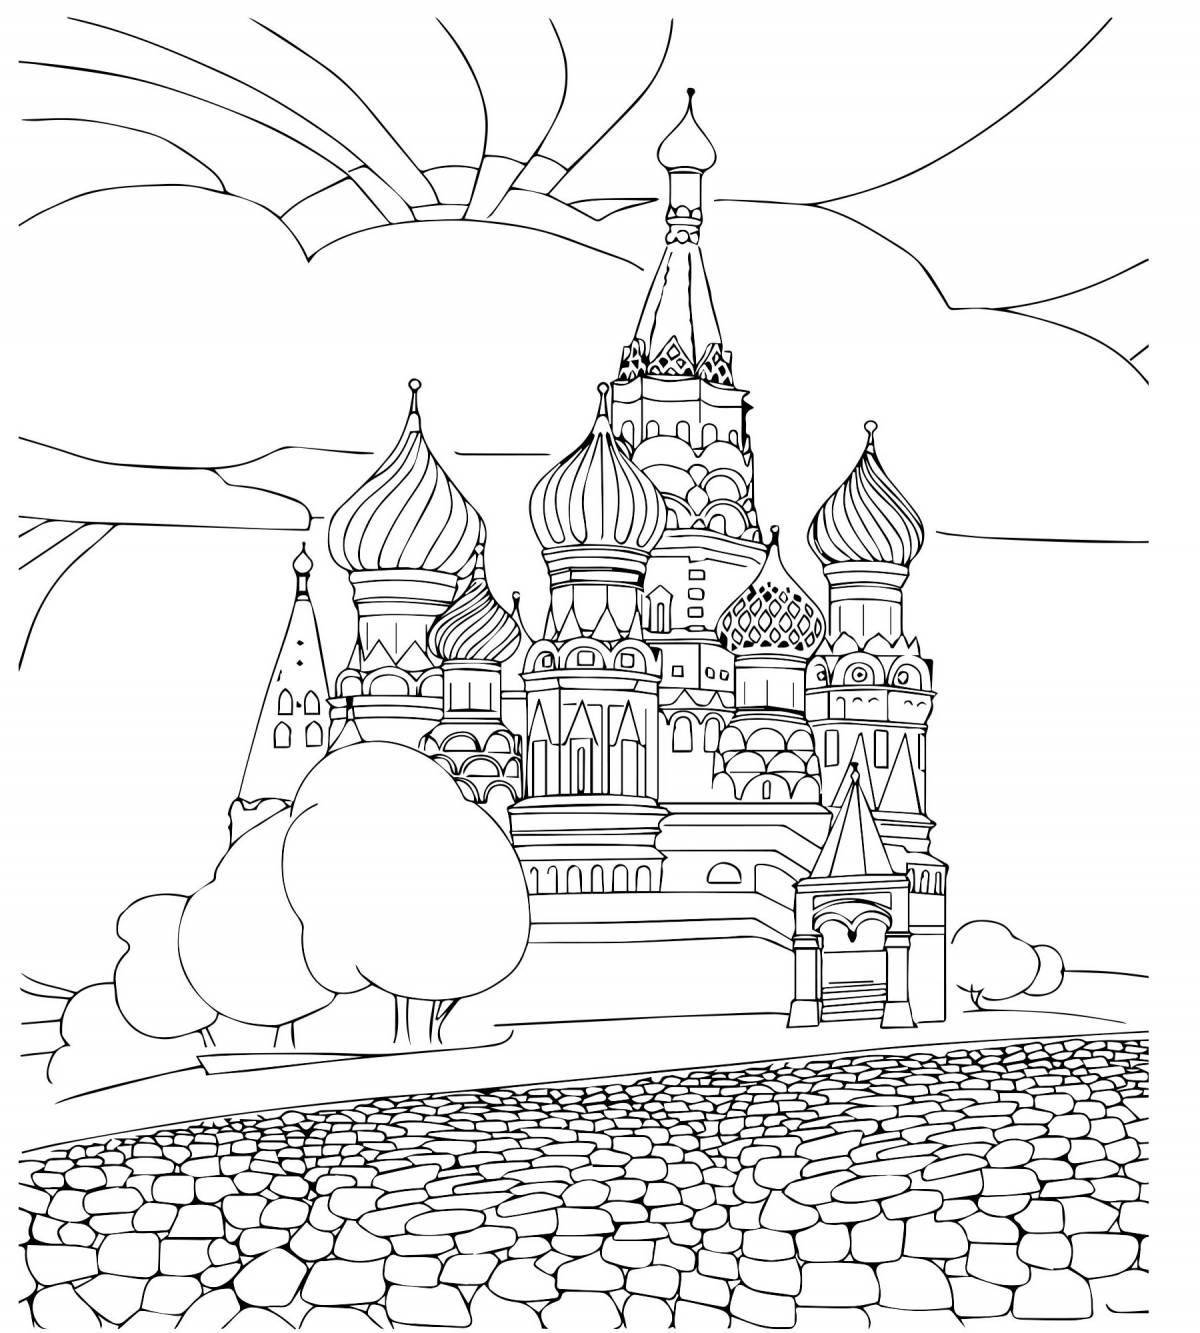 Amazing coloring pages of moscow, the capital of russia for kids